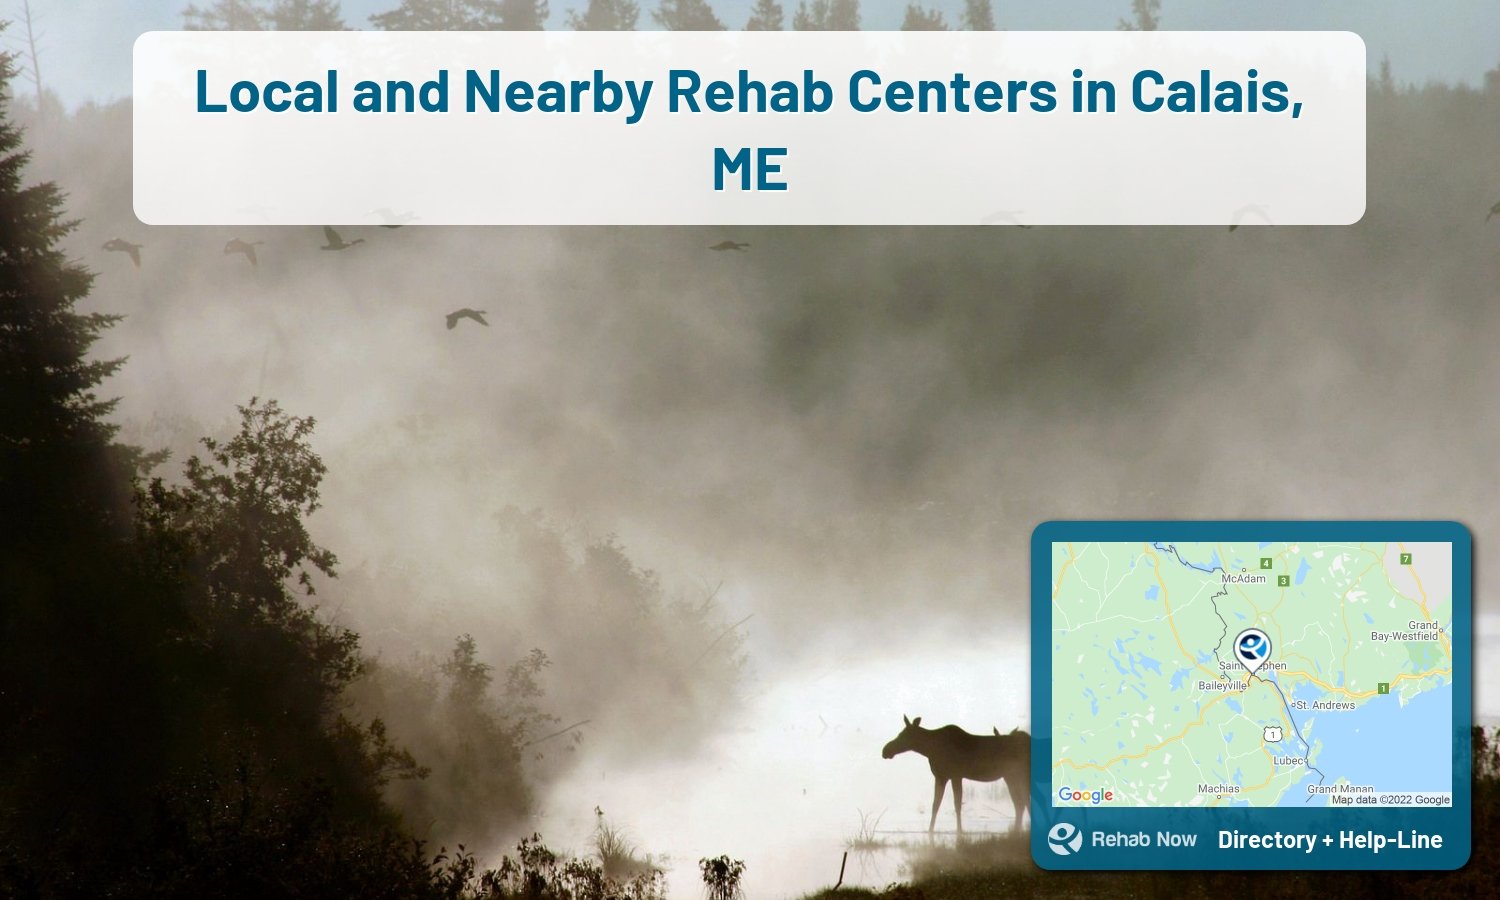 Calais, ME Treatment Centers. Find drug rehab in Calais, Maine, or detox and treatment programs. Get the right help now!